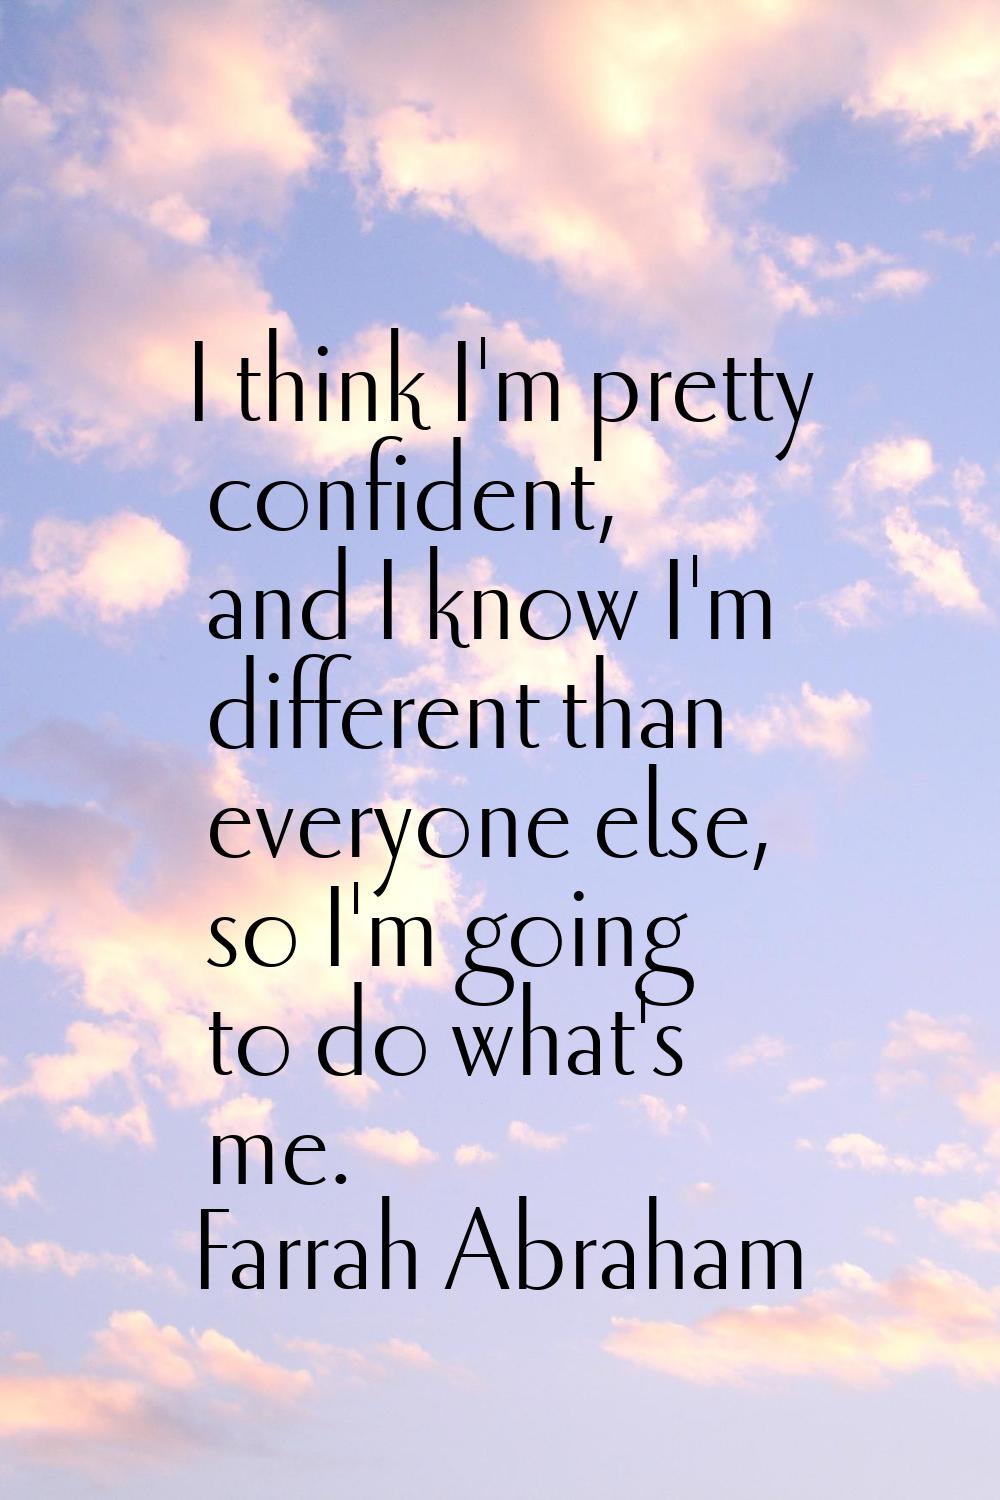 I think I'm pretty confident, and I know I'm different than everyone else, so I'm going to do what'